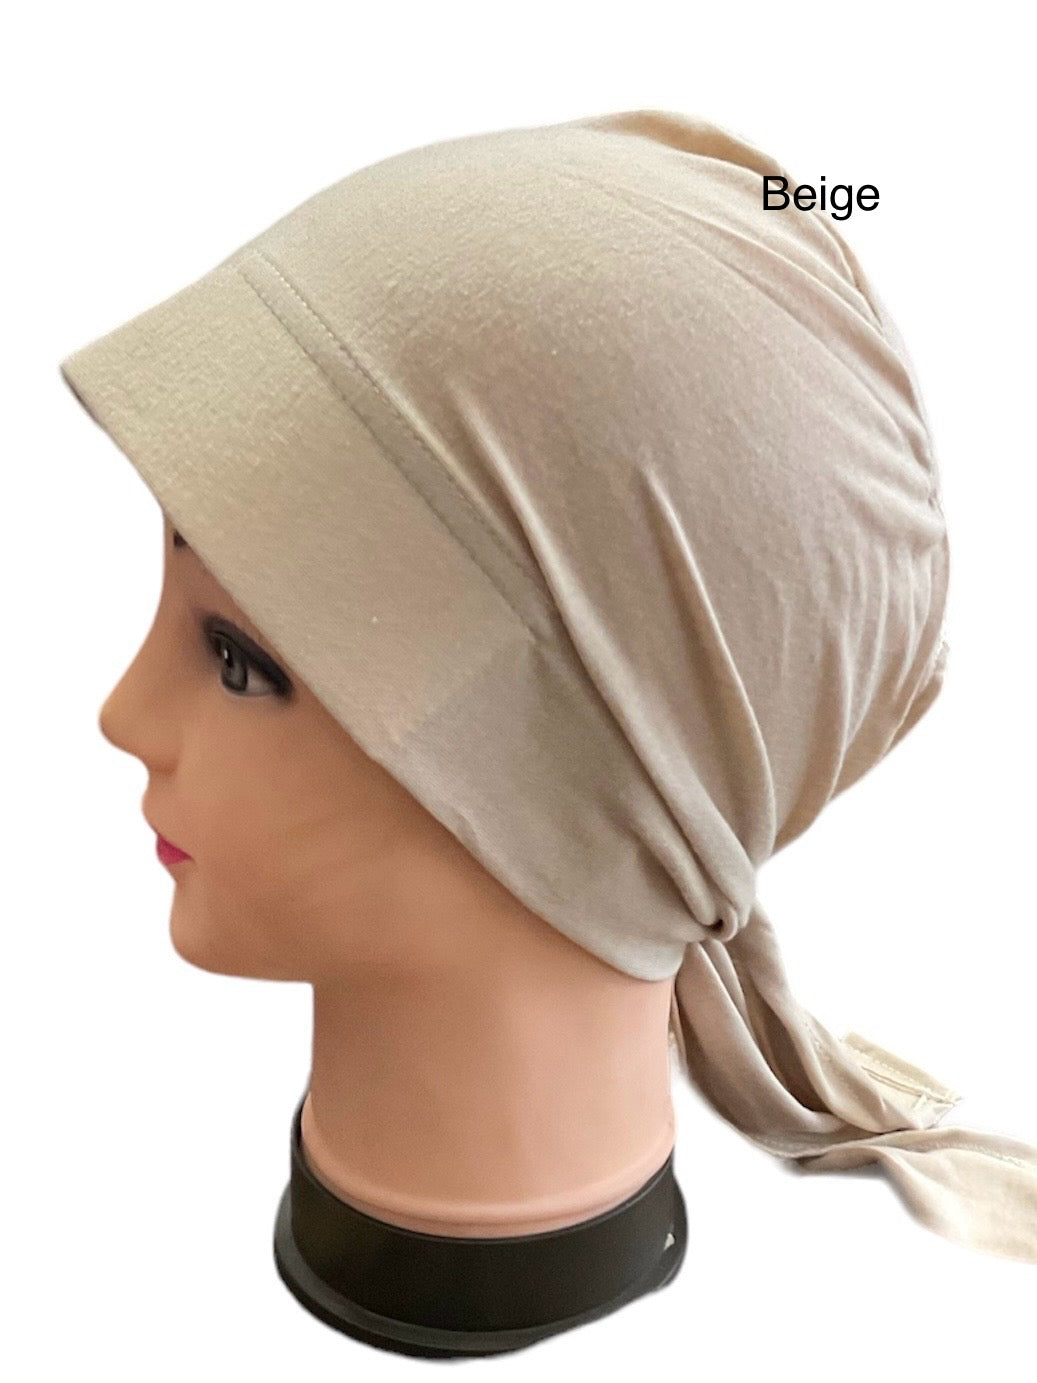 Turban Padded Under Scarf Cap with Tie in the Back / Bonnet cover 